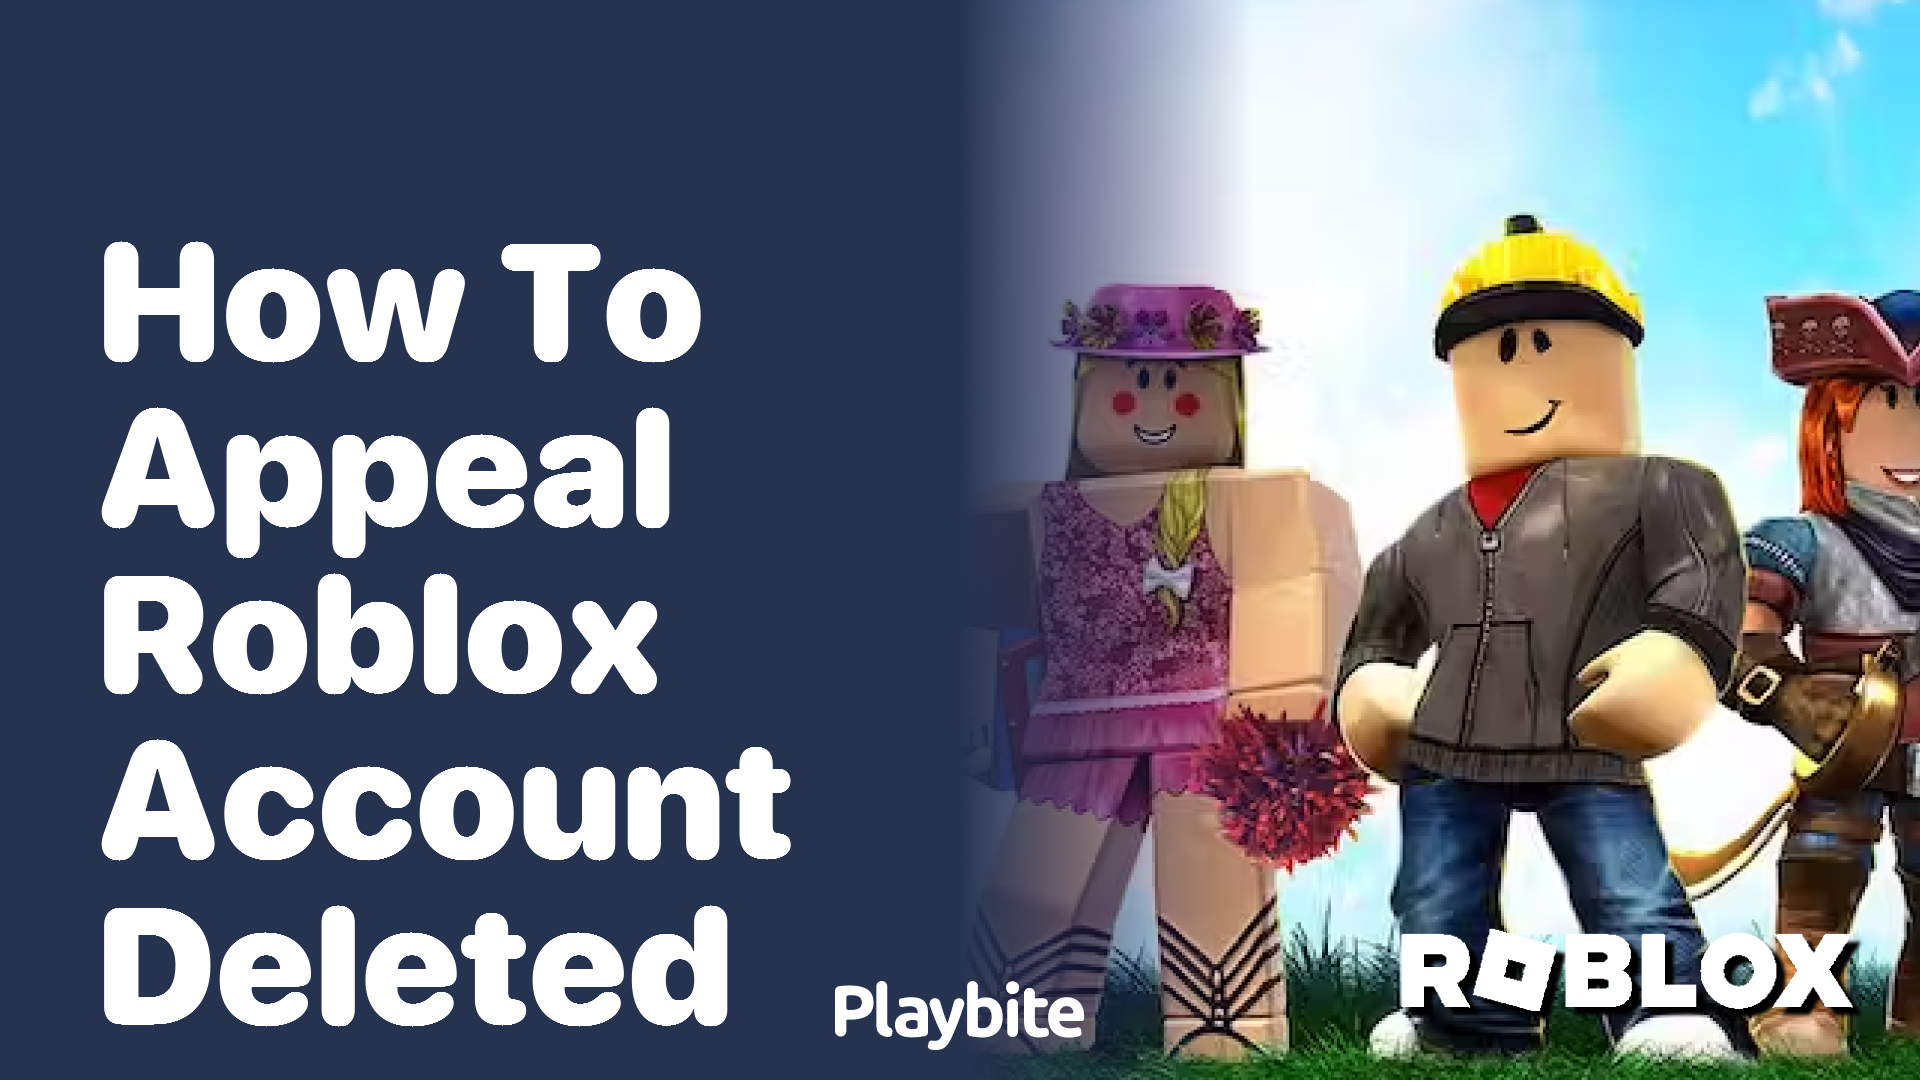 How to Appeal a Deleted Roblox Account